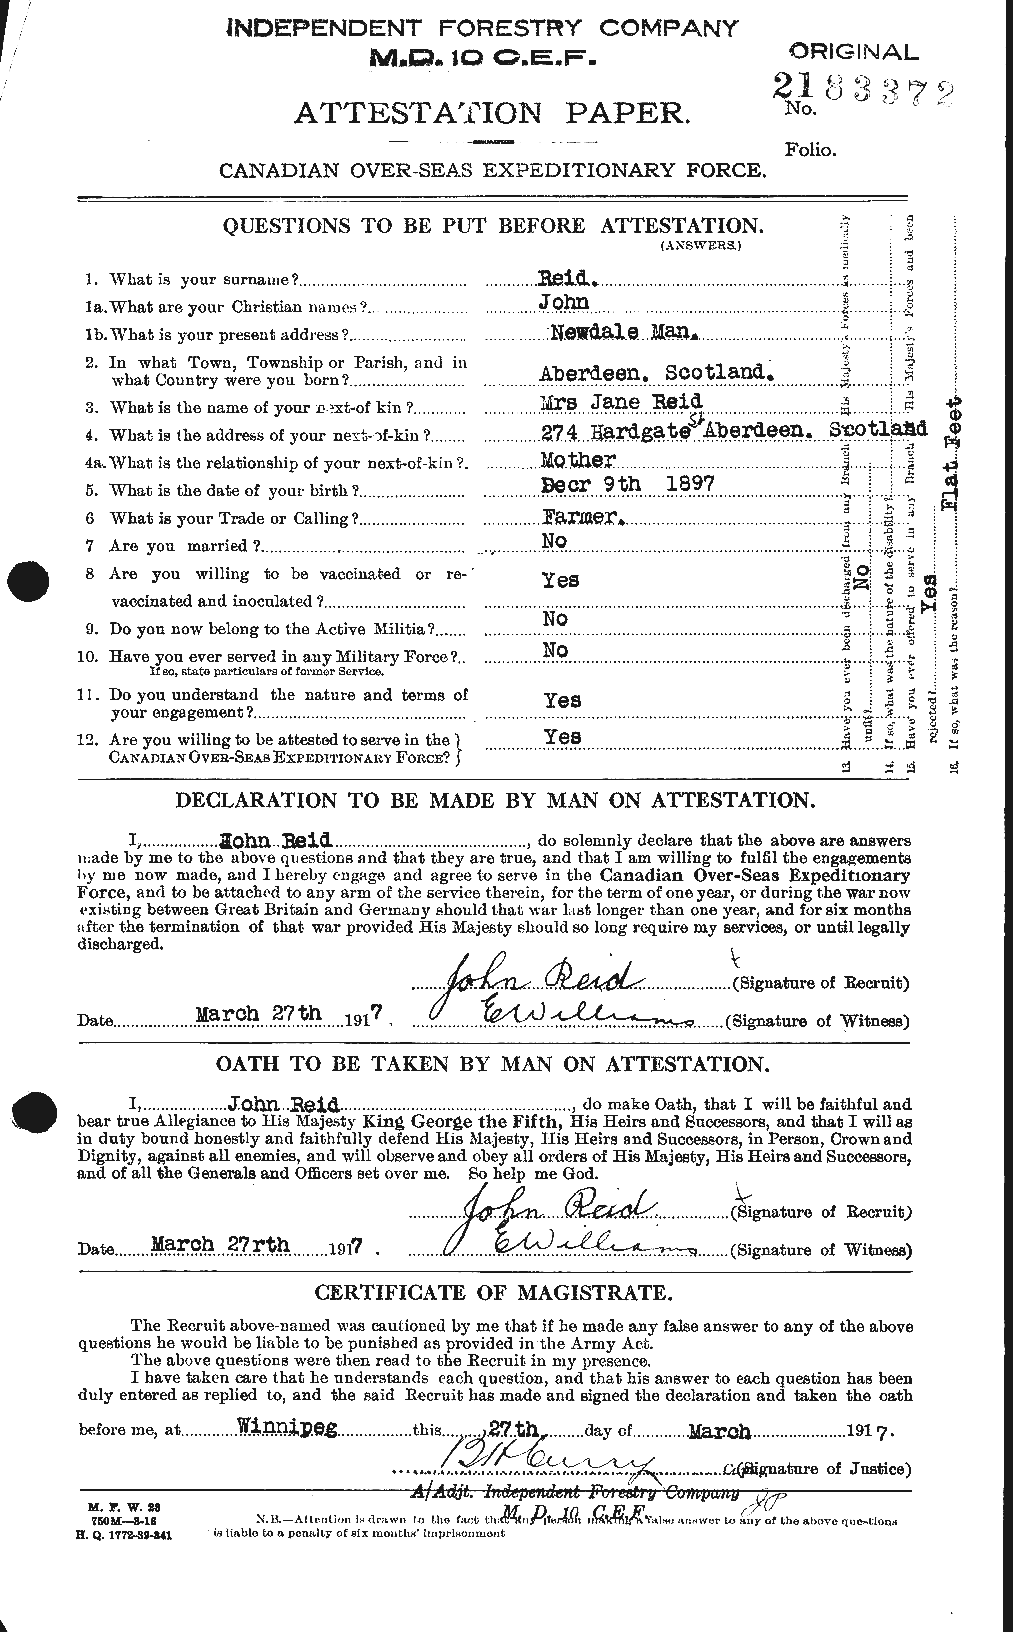 Personnel Records of the First World War - CEF 598751a